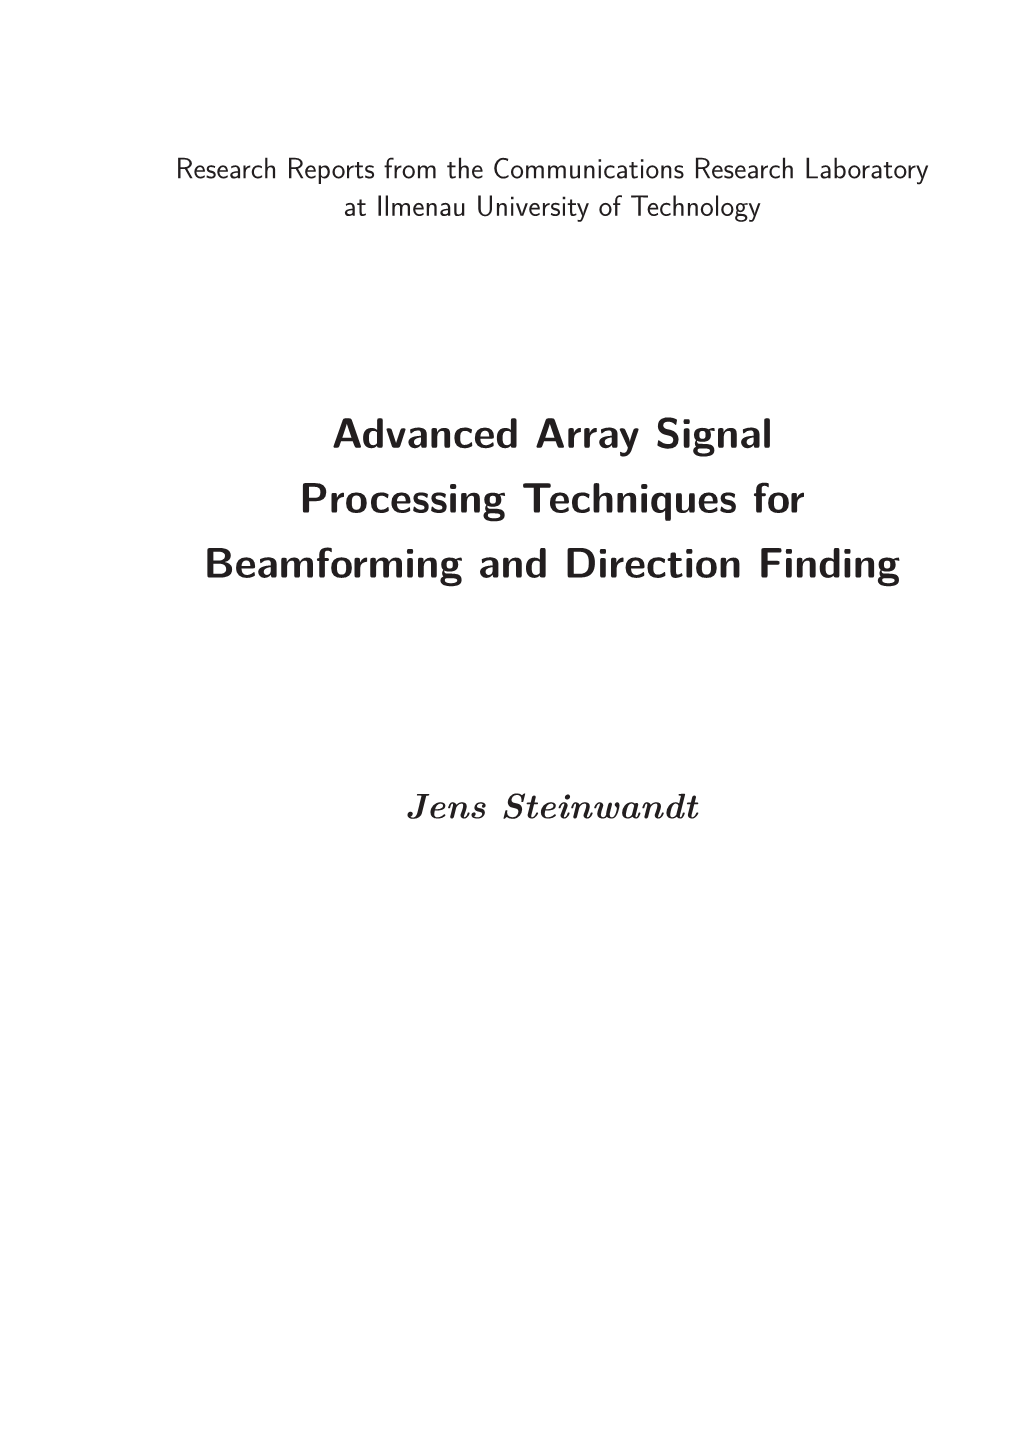 Advanced Array Signal Processing Techniques for Beamforming and Direction Finding